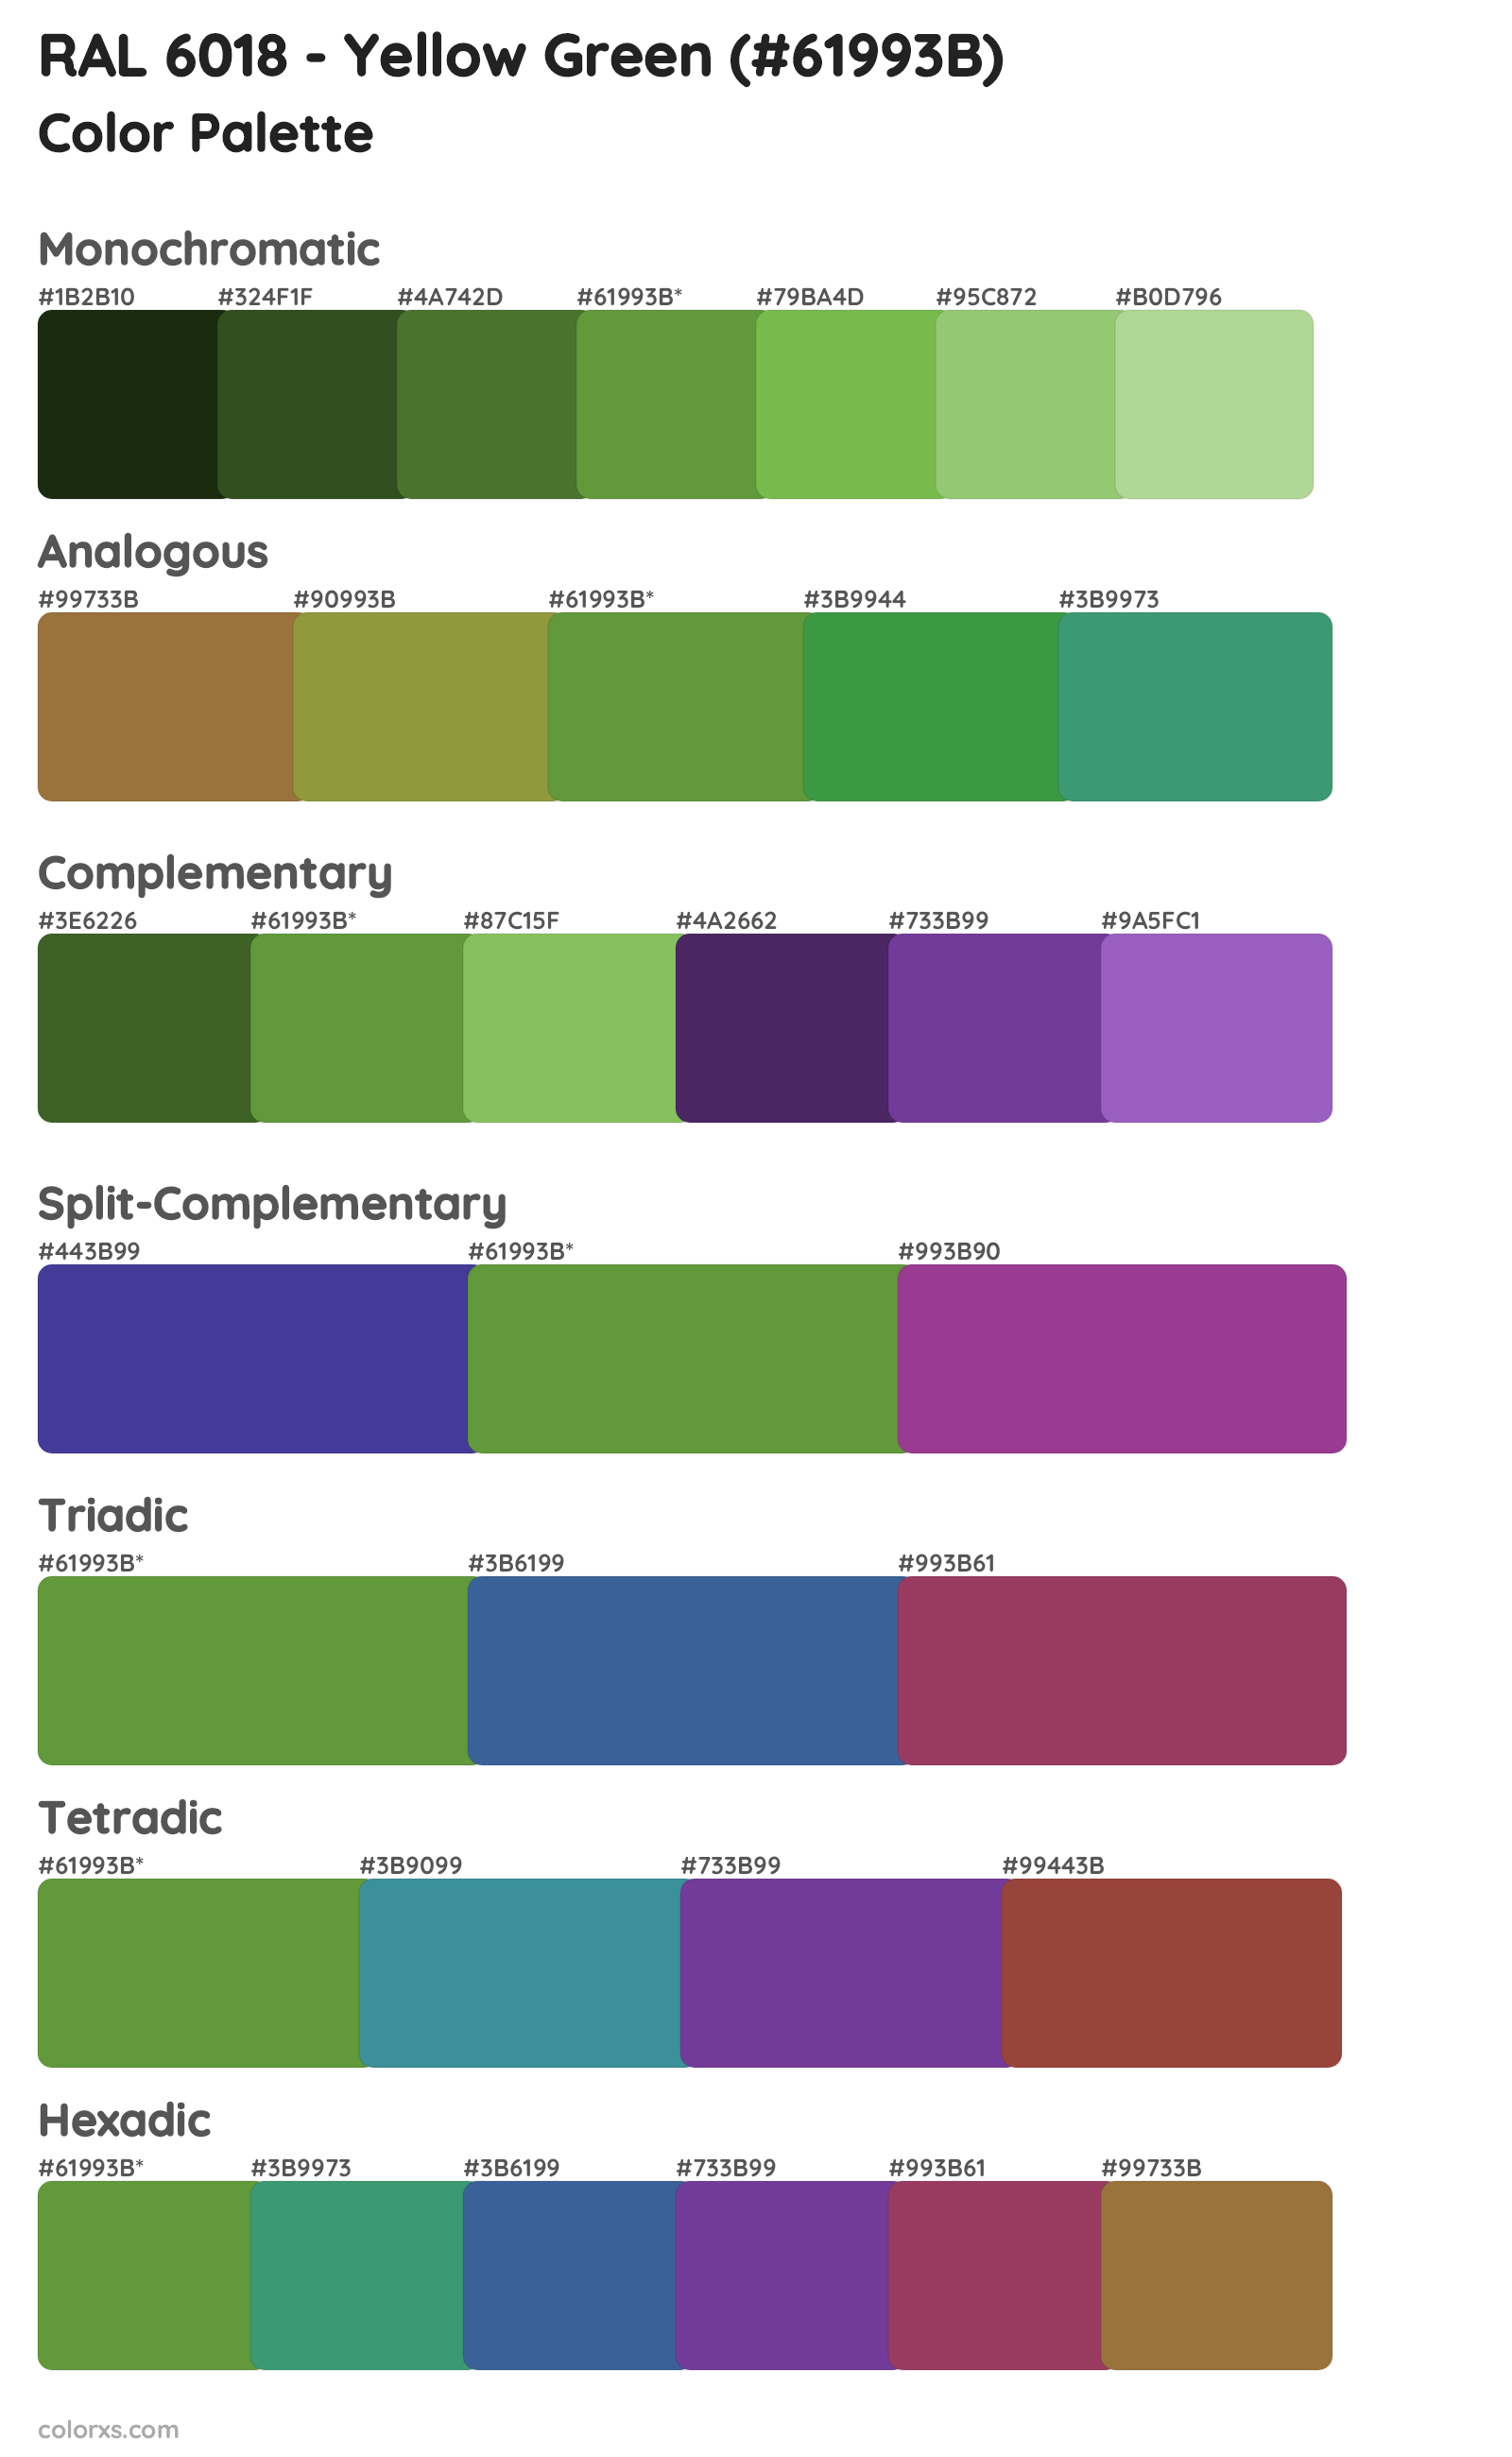 RAL 6018 - Yellow Green Color Scheme Palettes